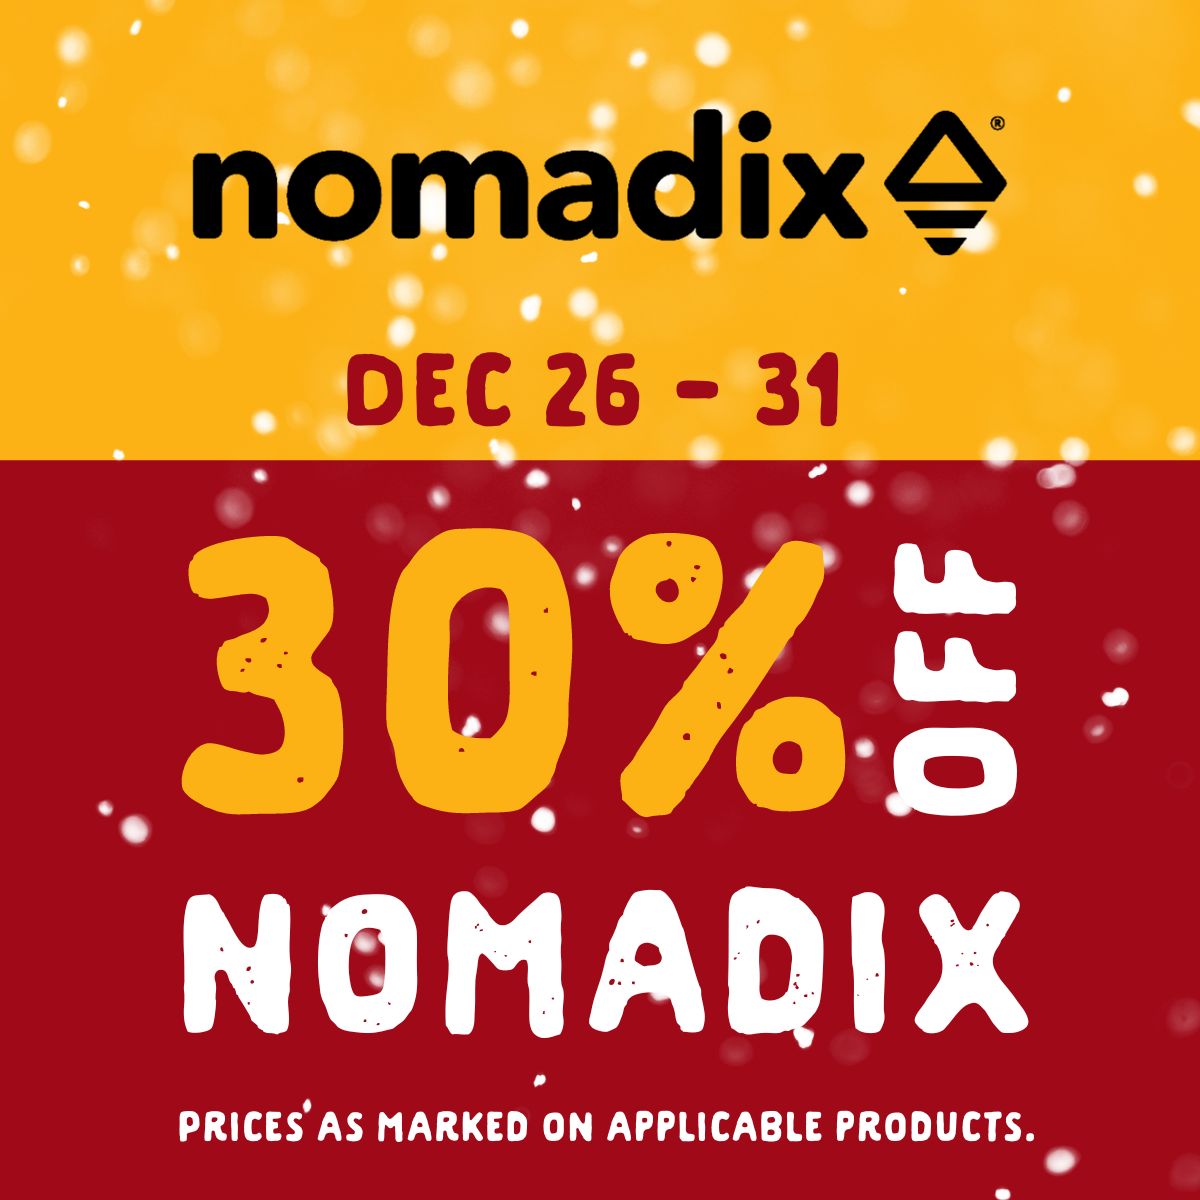 30% off Nomadix from December 26 to 31. Prices as marked on applicable products.